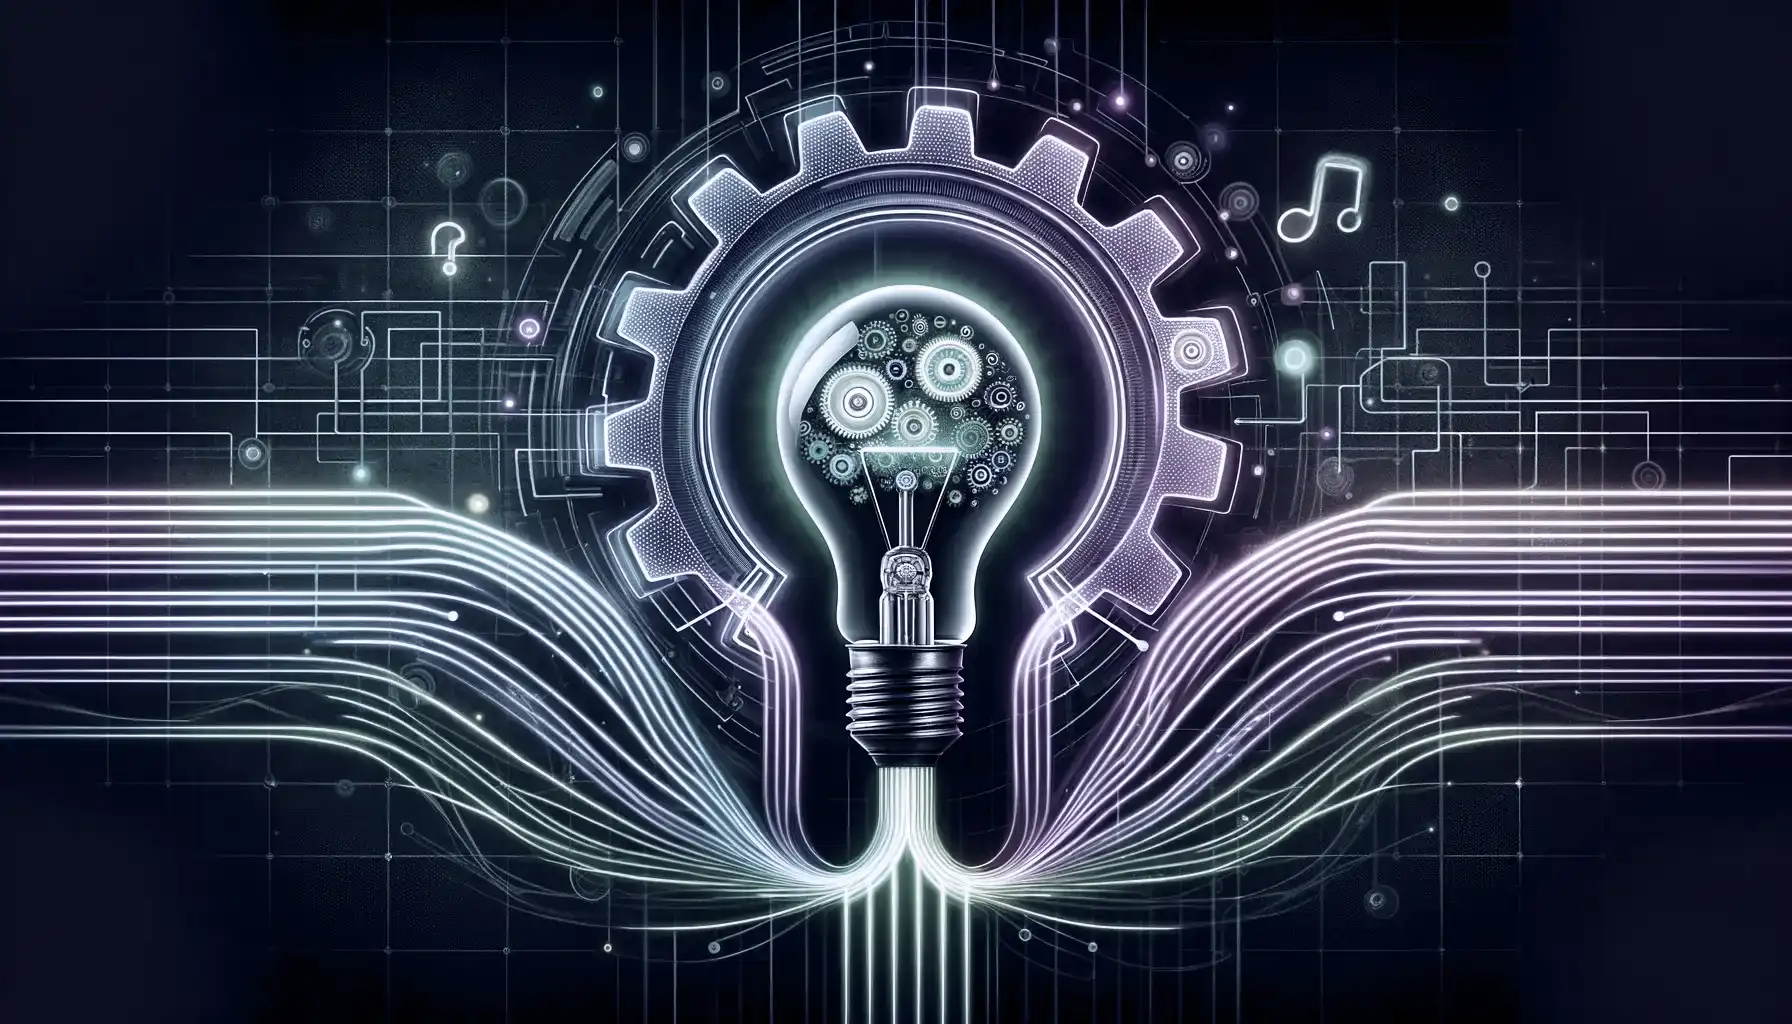 This image encapsulates the concept of business process automation technology aiding innovation in the business sector. The central element is a lightbulb, representing the generation of new ideas, which is seamlessly integrated with a mechanical gear cog, indicative of the automation aspect. Data streams in neon green and purple flow in and out of the lightbulb and gear cog, symbolizing the dynamic and efficient integration of innovative ideas with automated business processes. The neon lights add a modern and futuristic feel to the image, emphasizing the transformative power of automation technology in turning creative ideas into operational realities. The overall design highlights the synergy between creativity and technology in advancing business innovation.